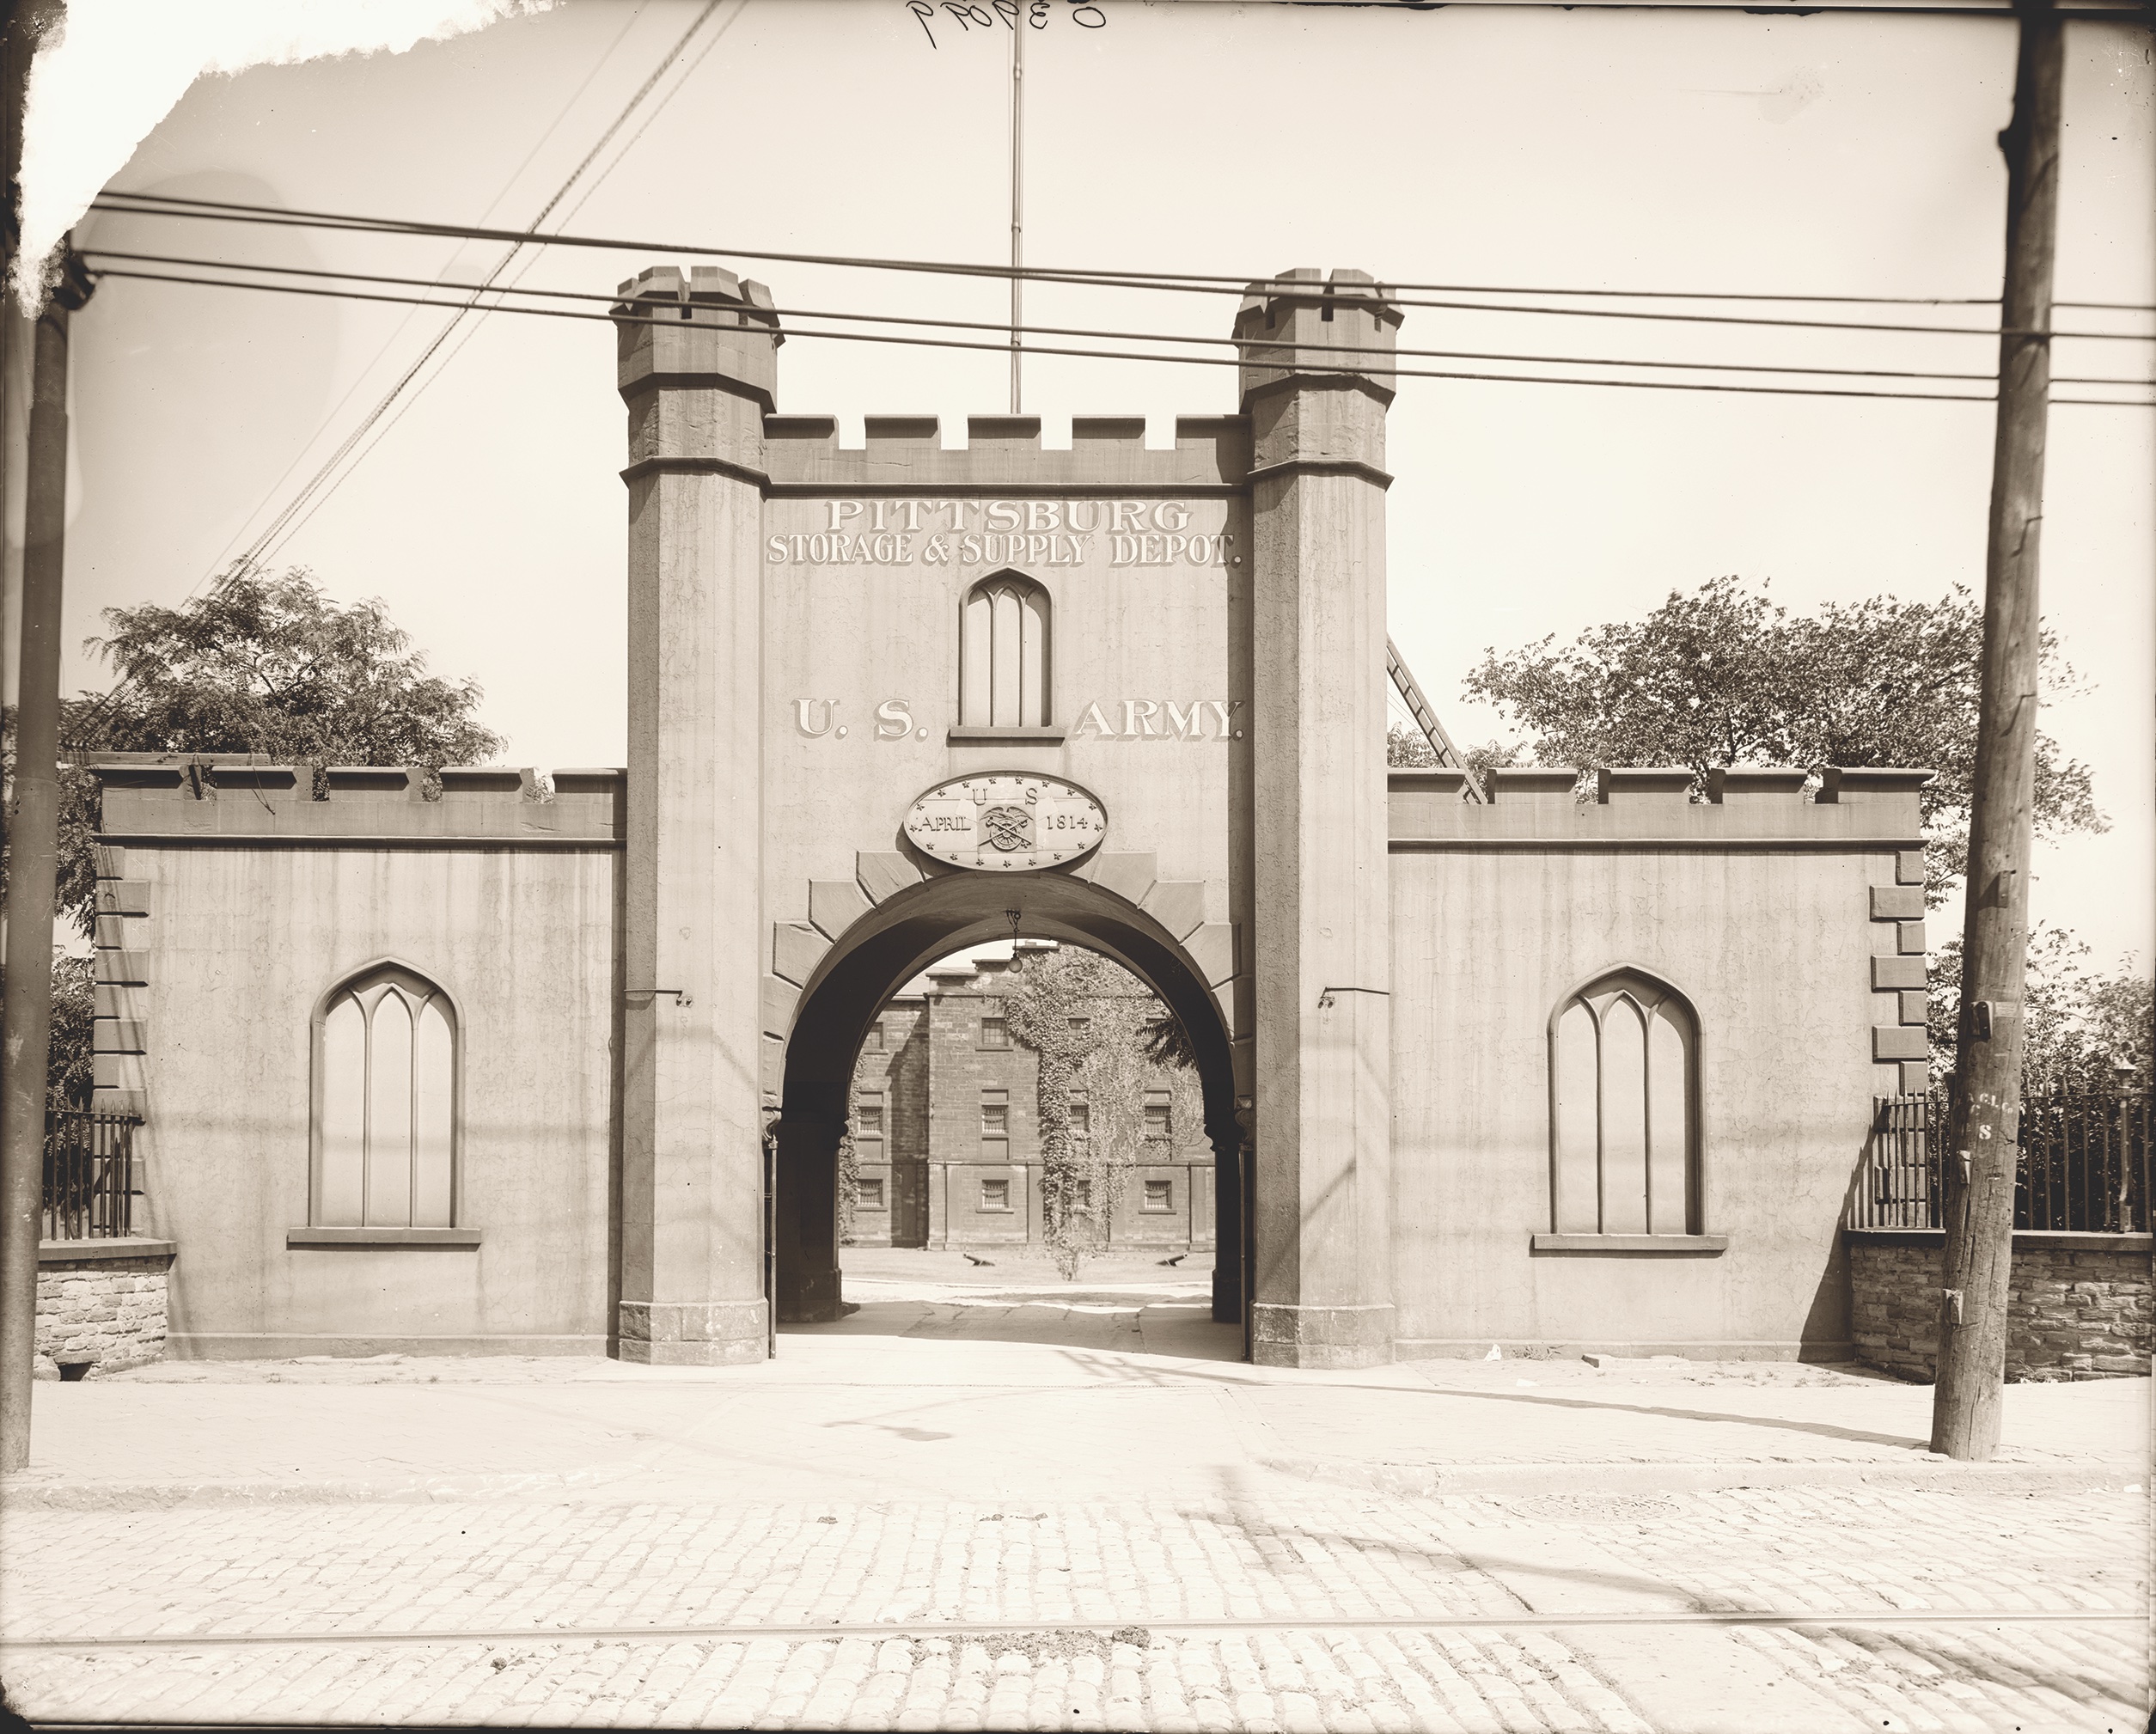 Workers who toiled at the arsenal would have passed through the main gate, pictured above. From 1891 to 1911, Pittsburgh officially dropped the “h” from its name, hence the spelling. (Library of Congress)